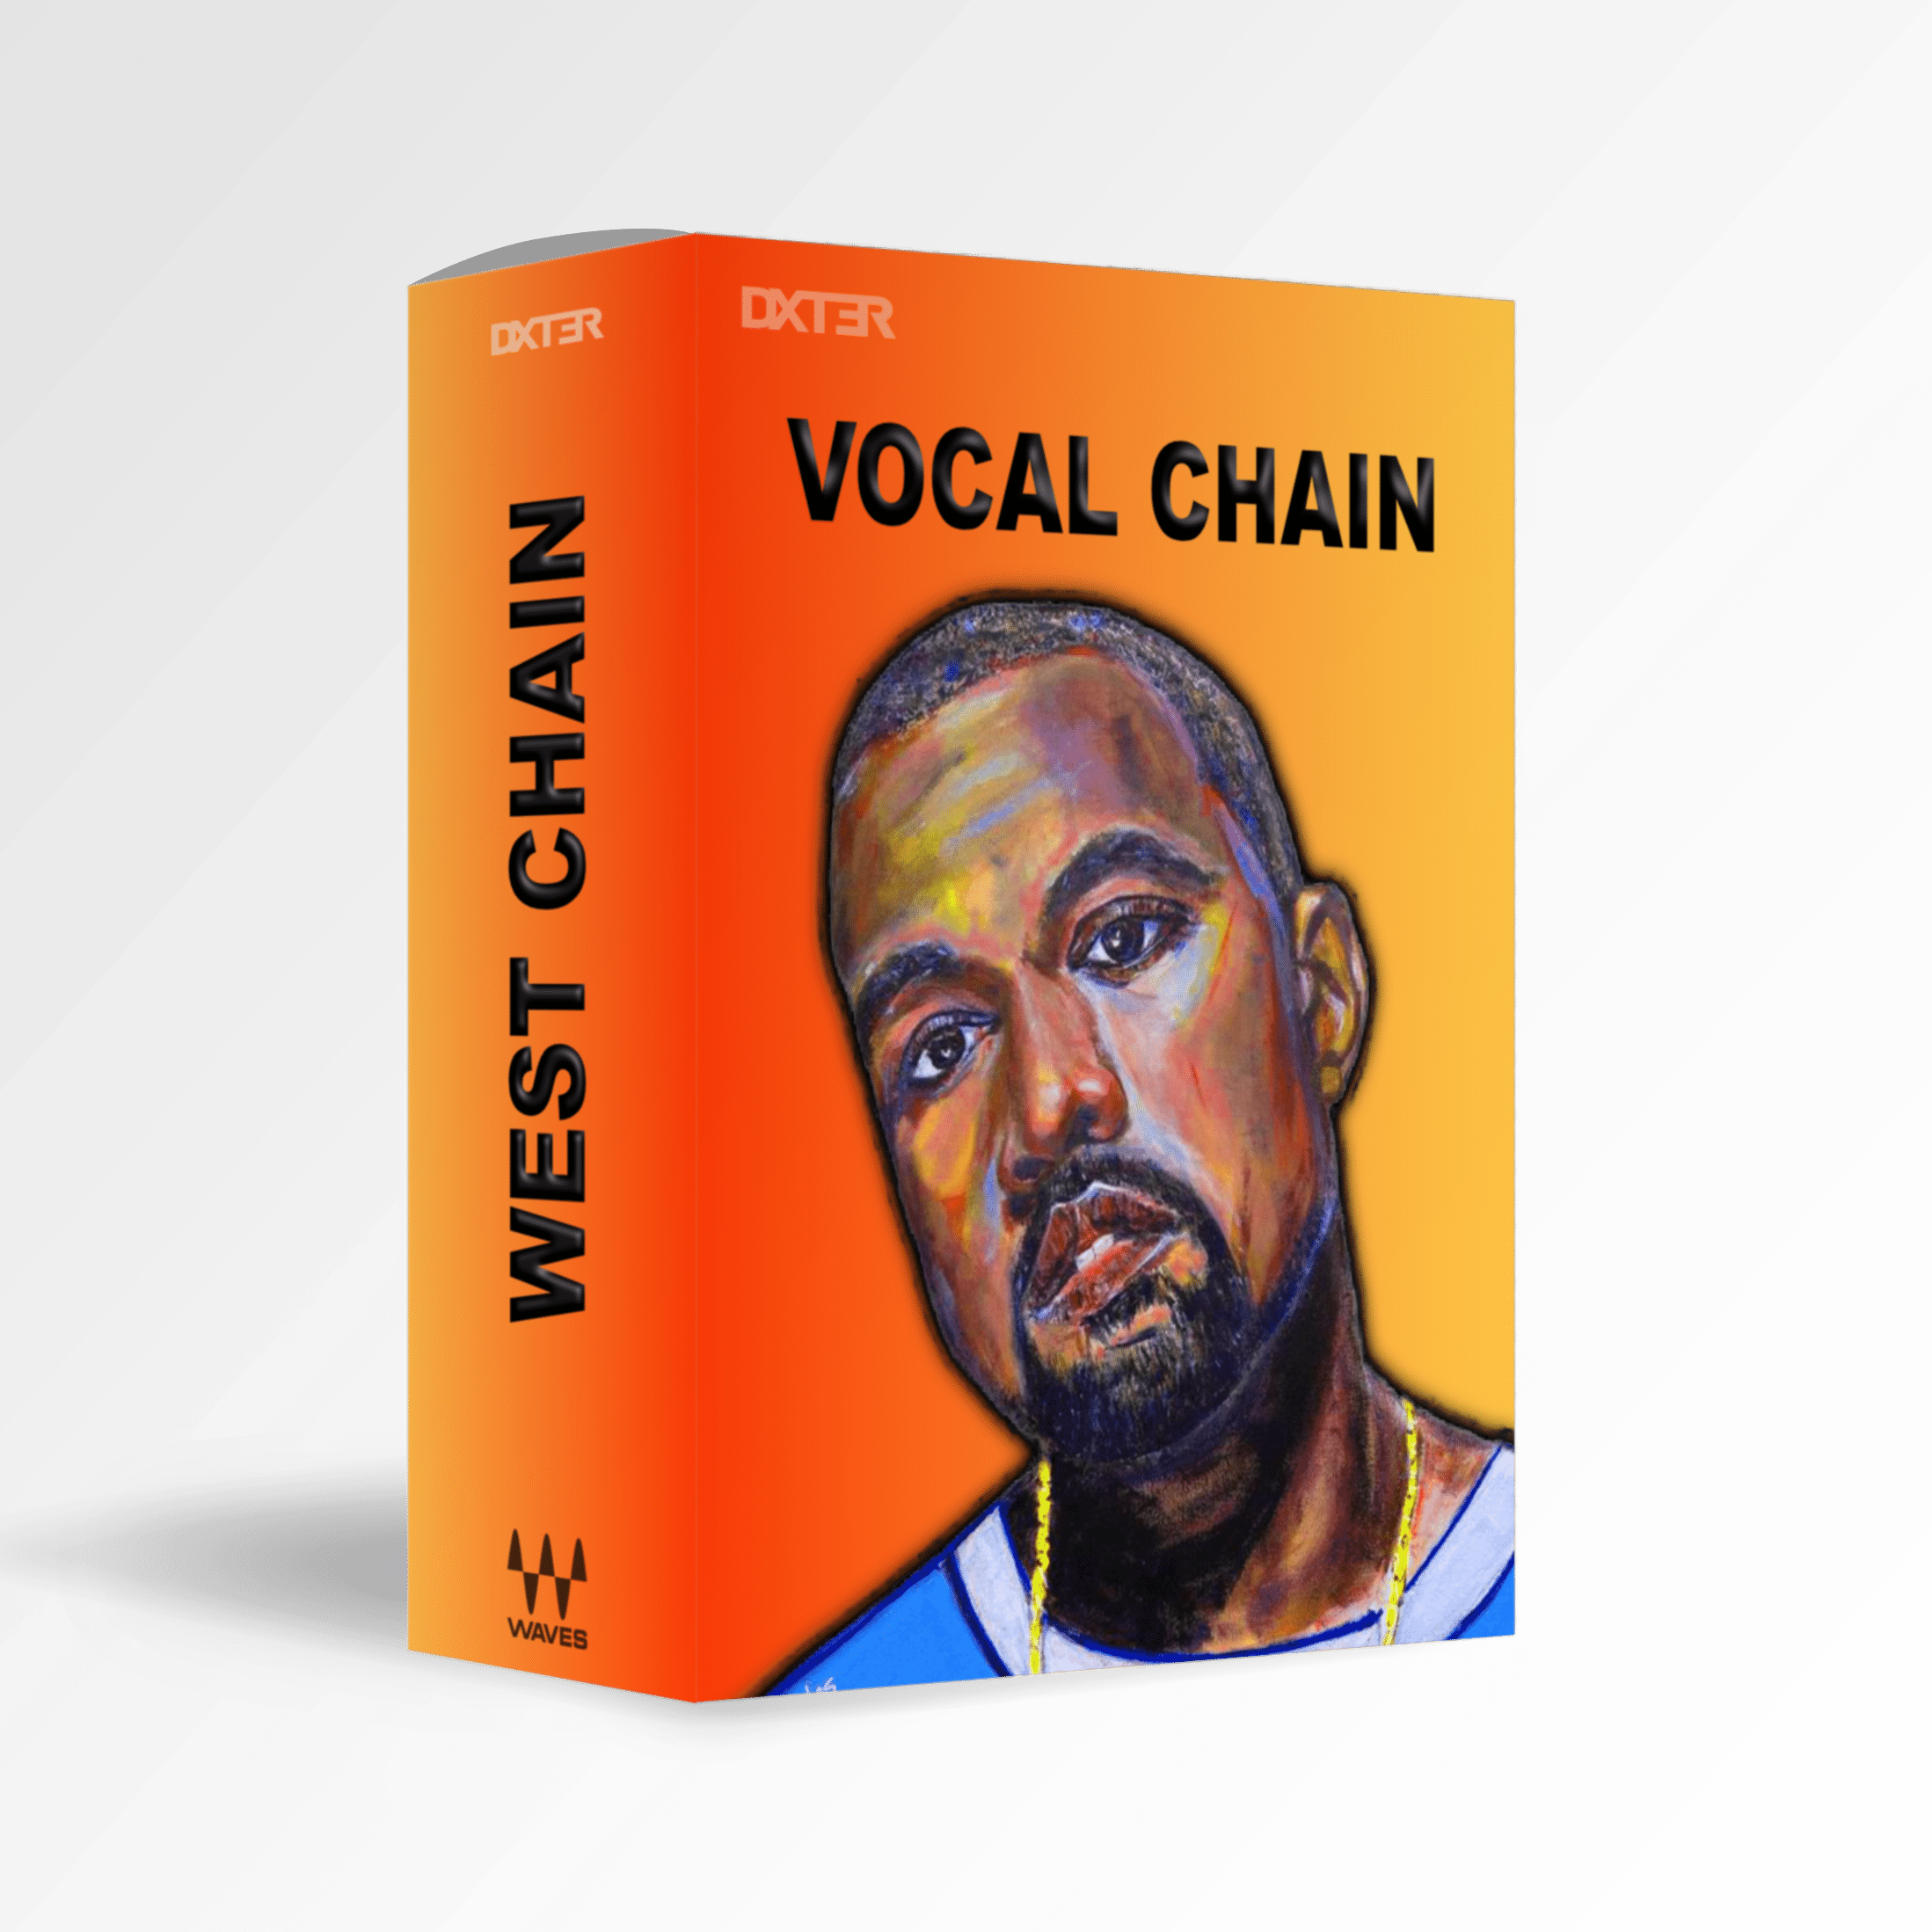 Kanye West type Vocal Chain | DXT3R